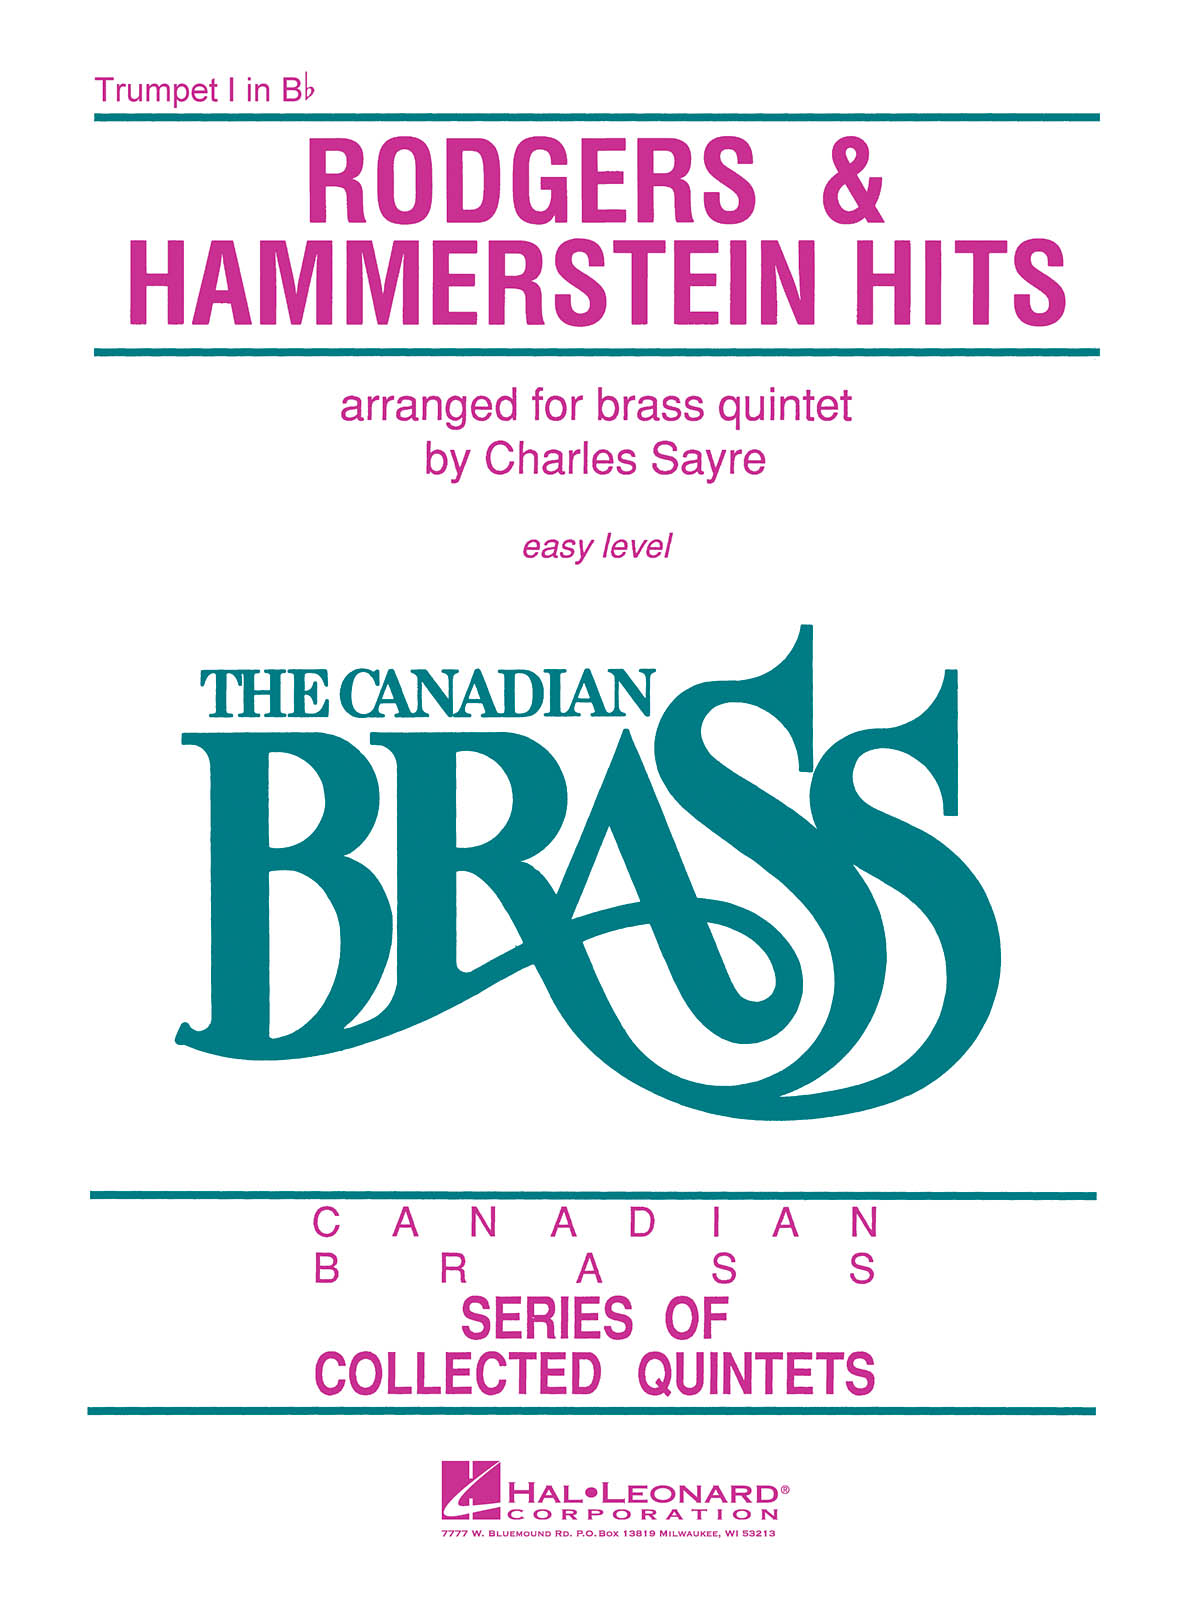 The CanadianBrass: Rodgers & Hammerstein Hits (1ste Trompet)